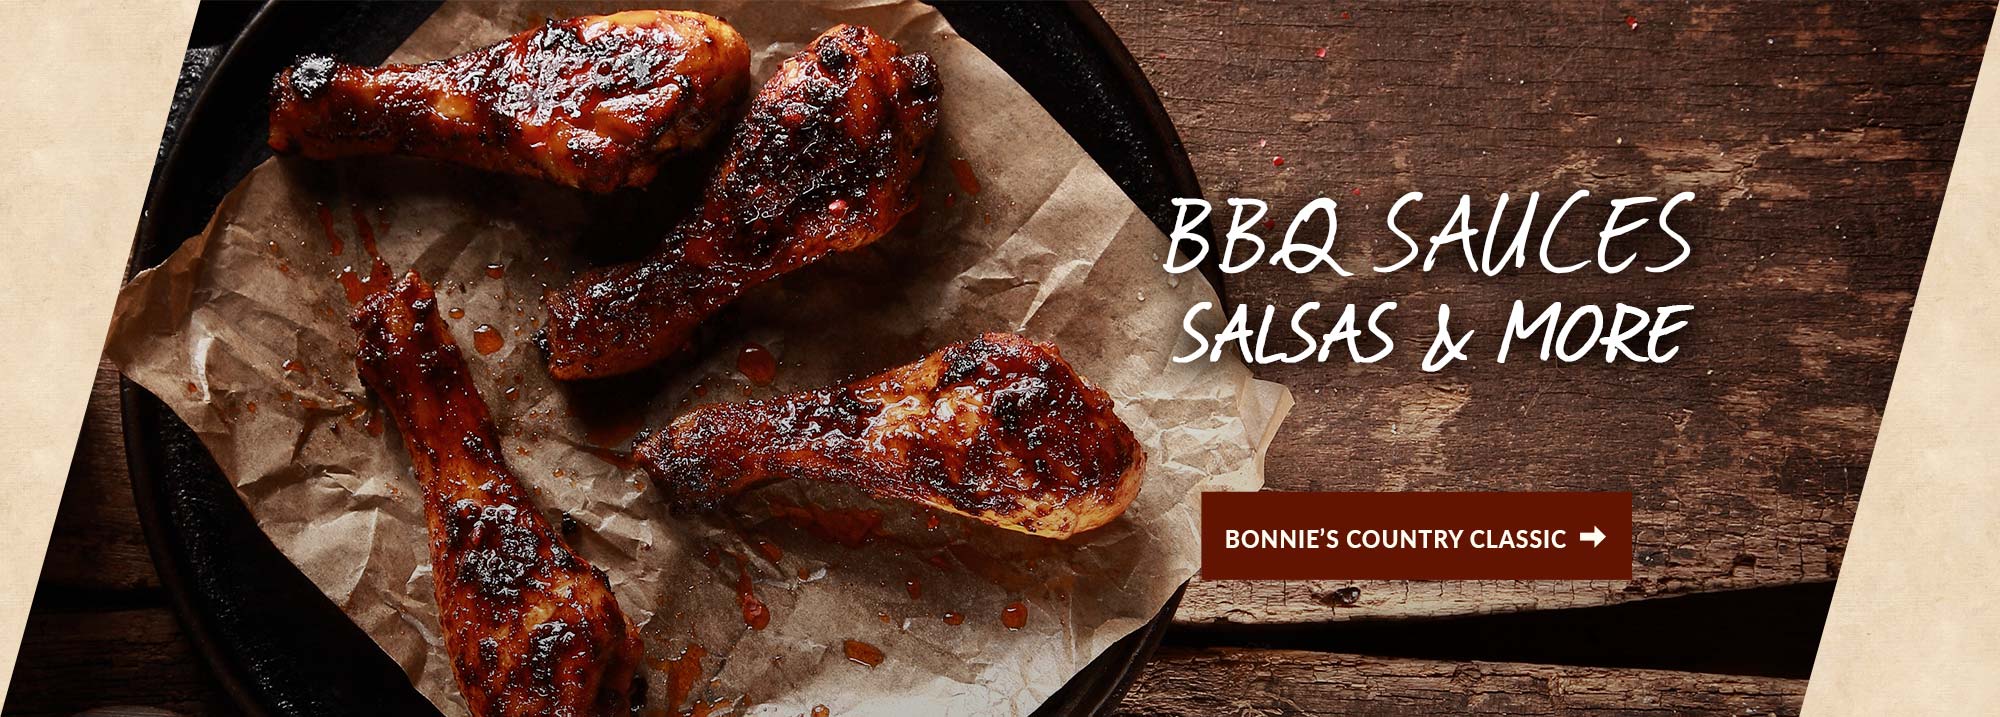 Copy of Bonnie's Country Classic BBQ Sauces, Salsas, Mustards & More